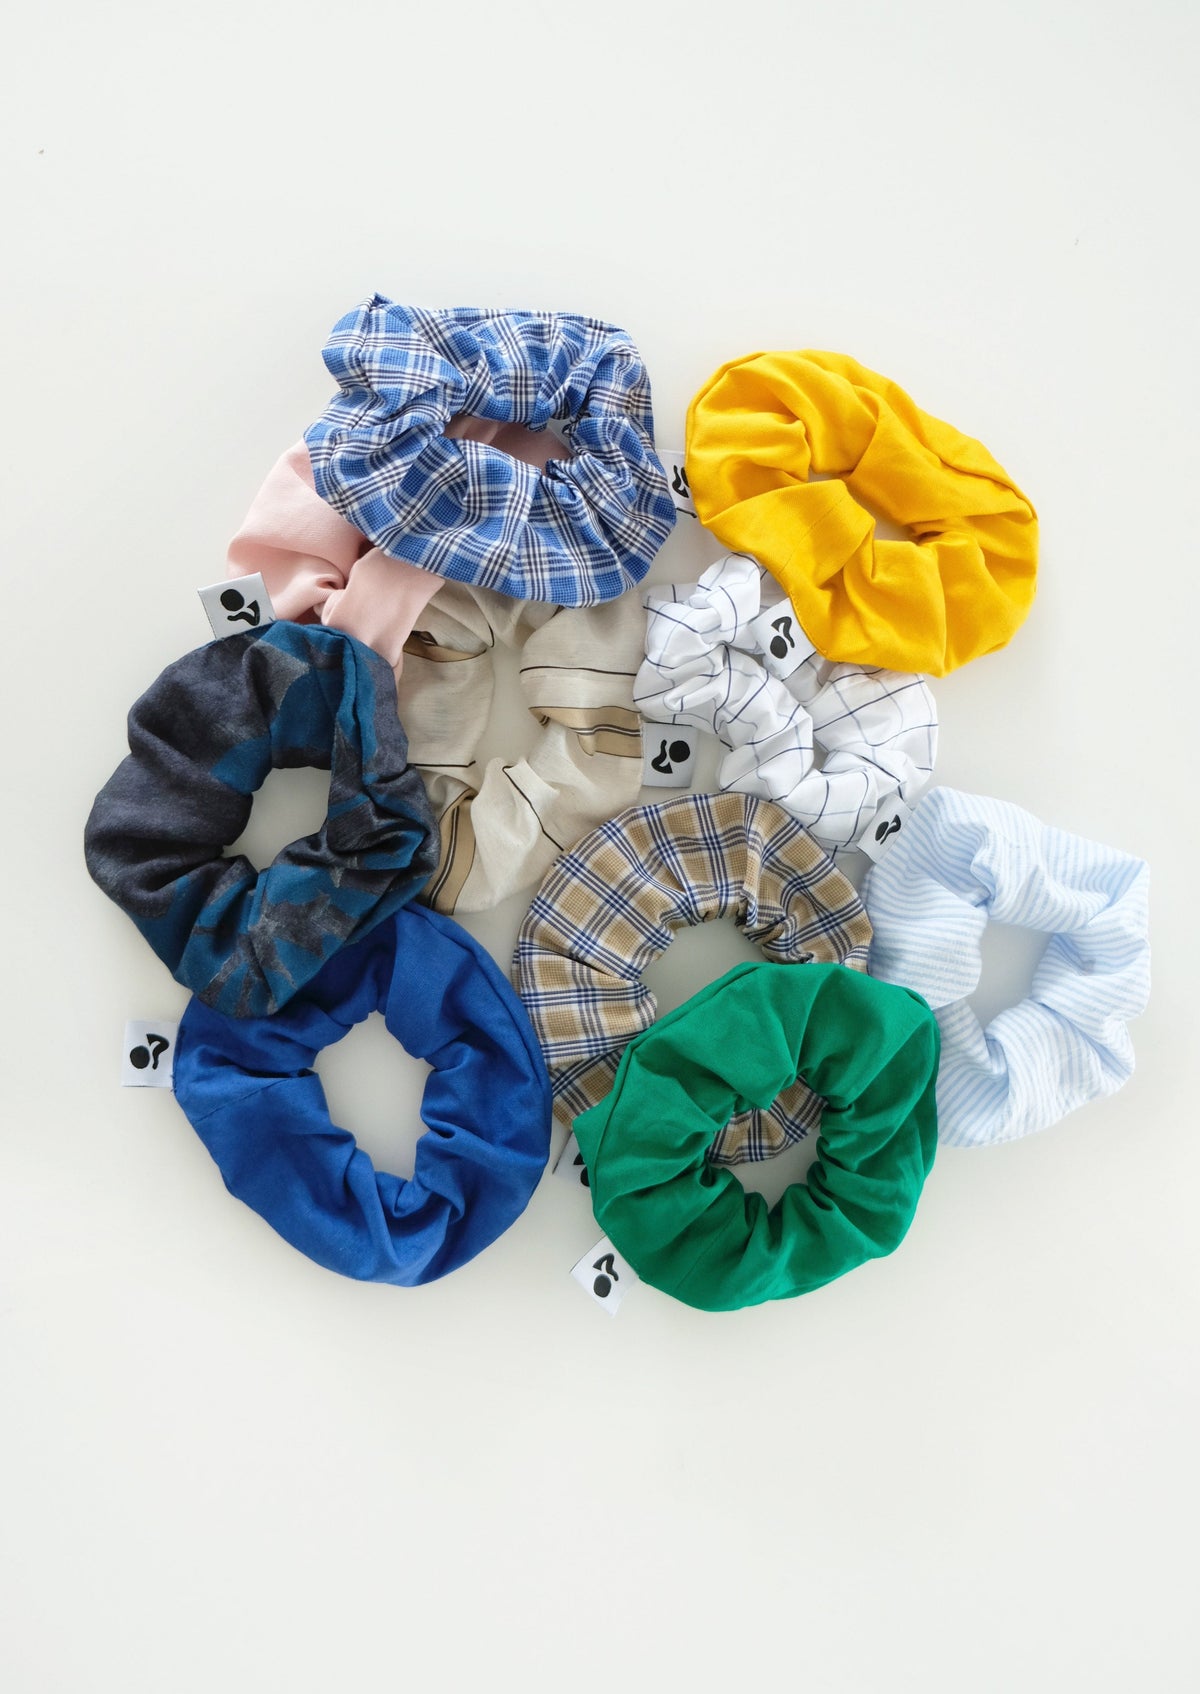 North Rocks Shopping Centre - Come down to Ally Fashion and check out their  new Spring pieces as well as these super cute hair scrunchies! ☀🛍👗